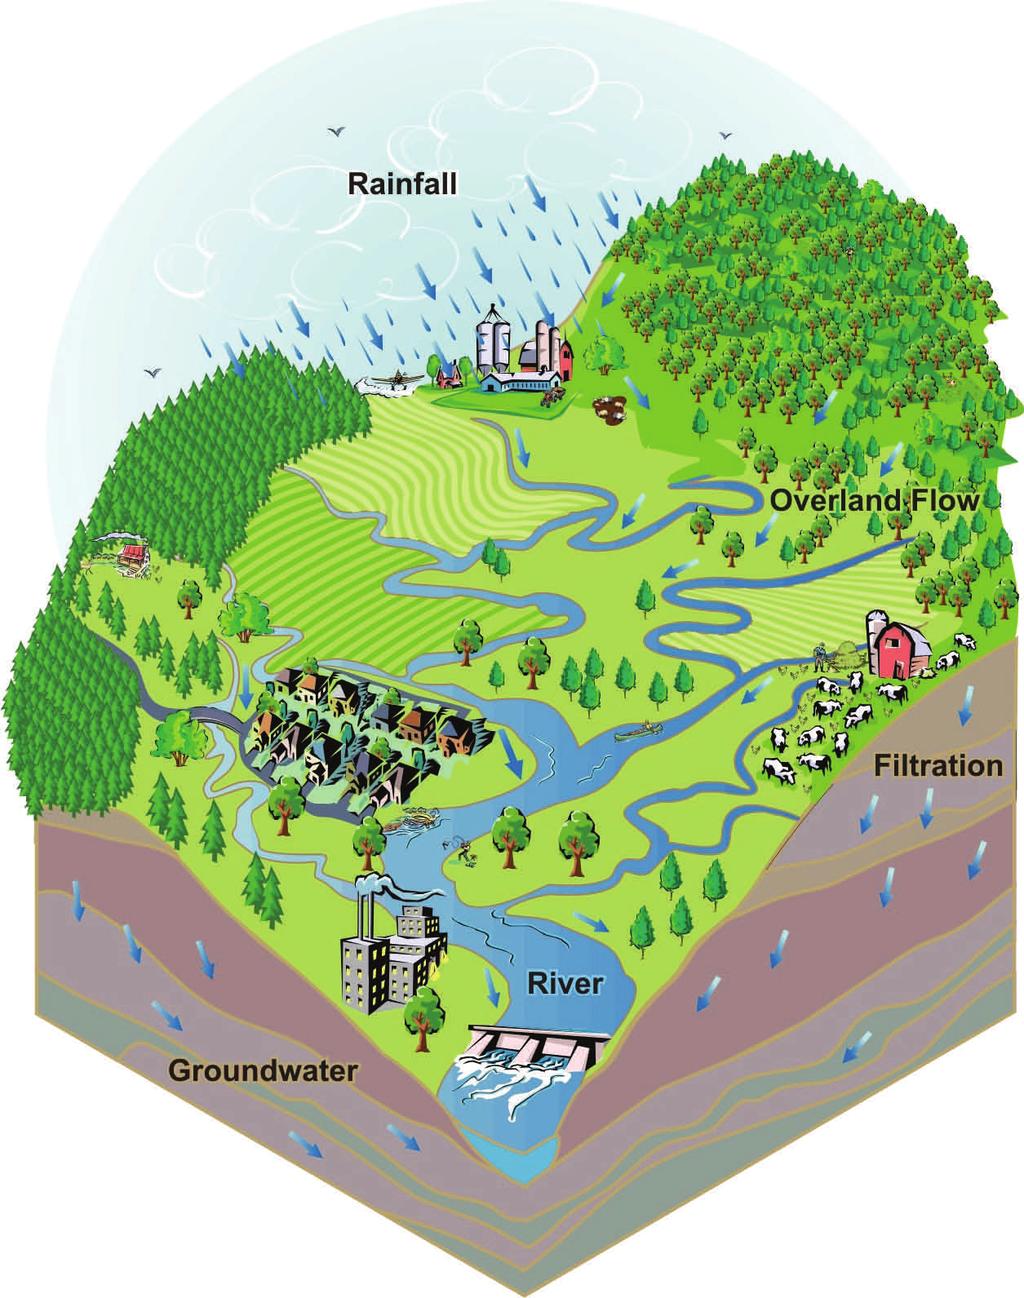 the contamination of groundwater.